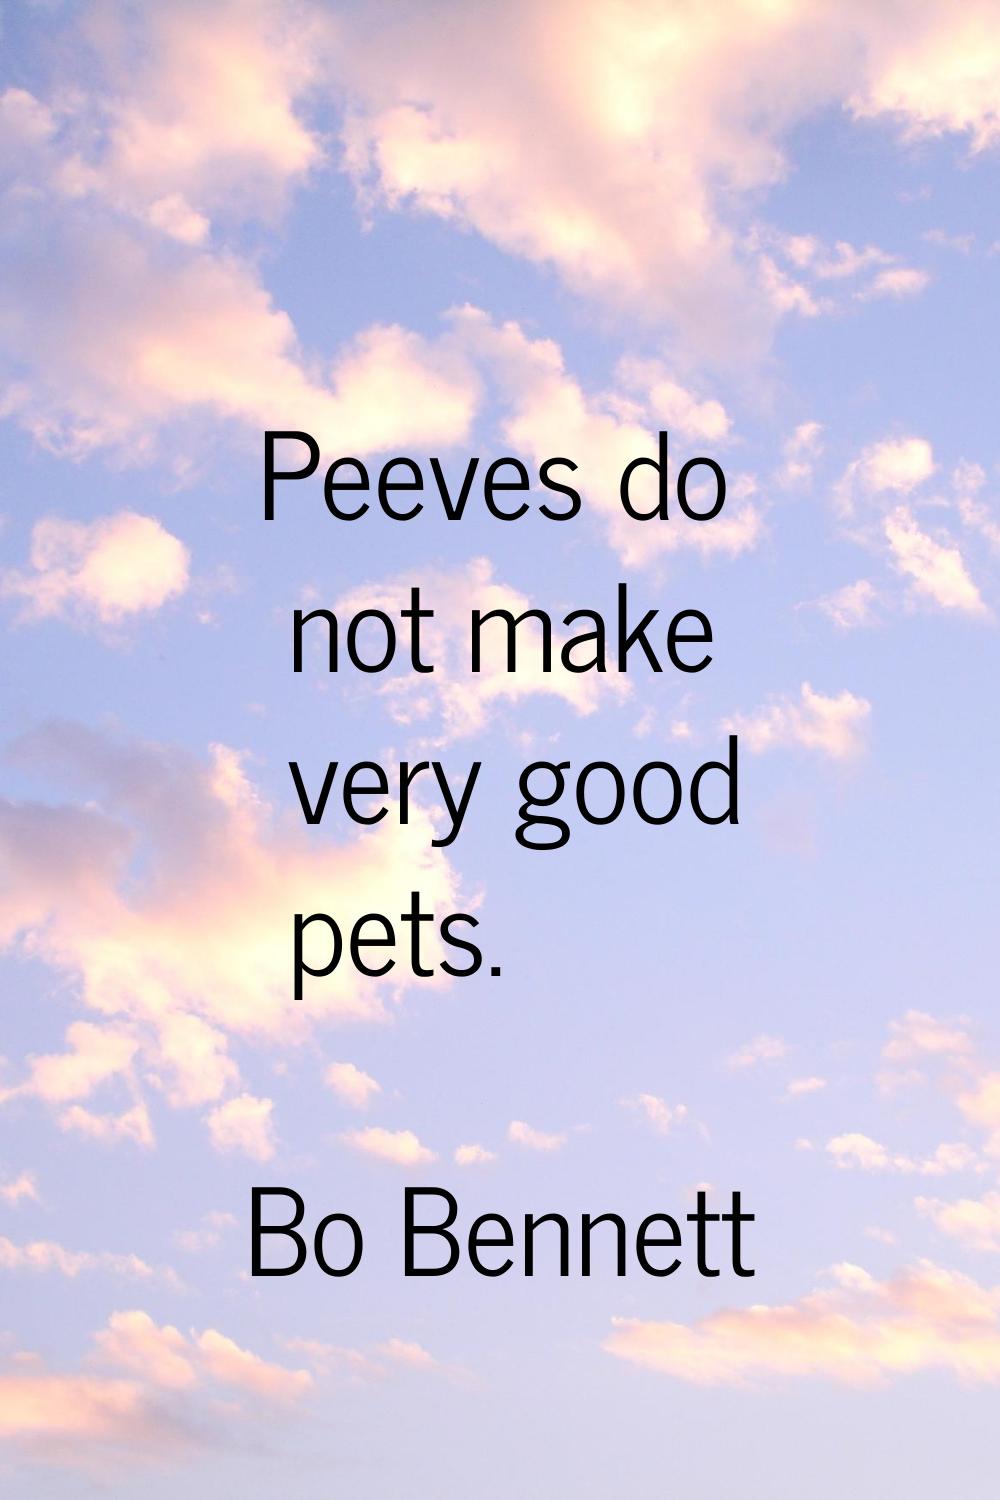 Peeves do not make very good pets.